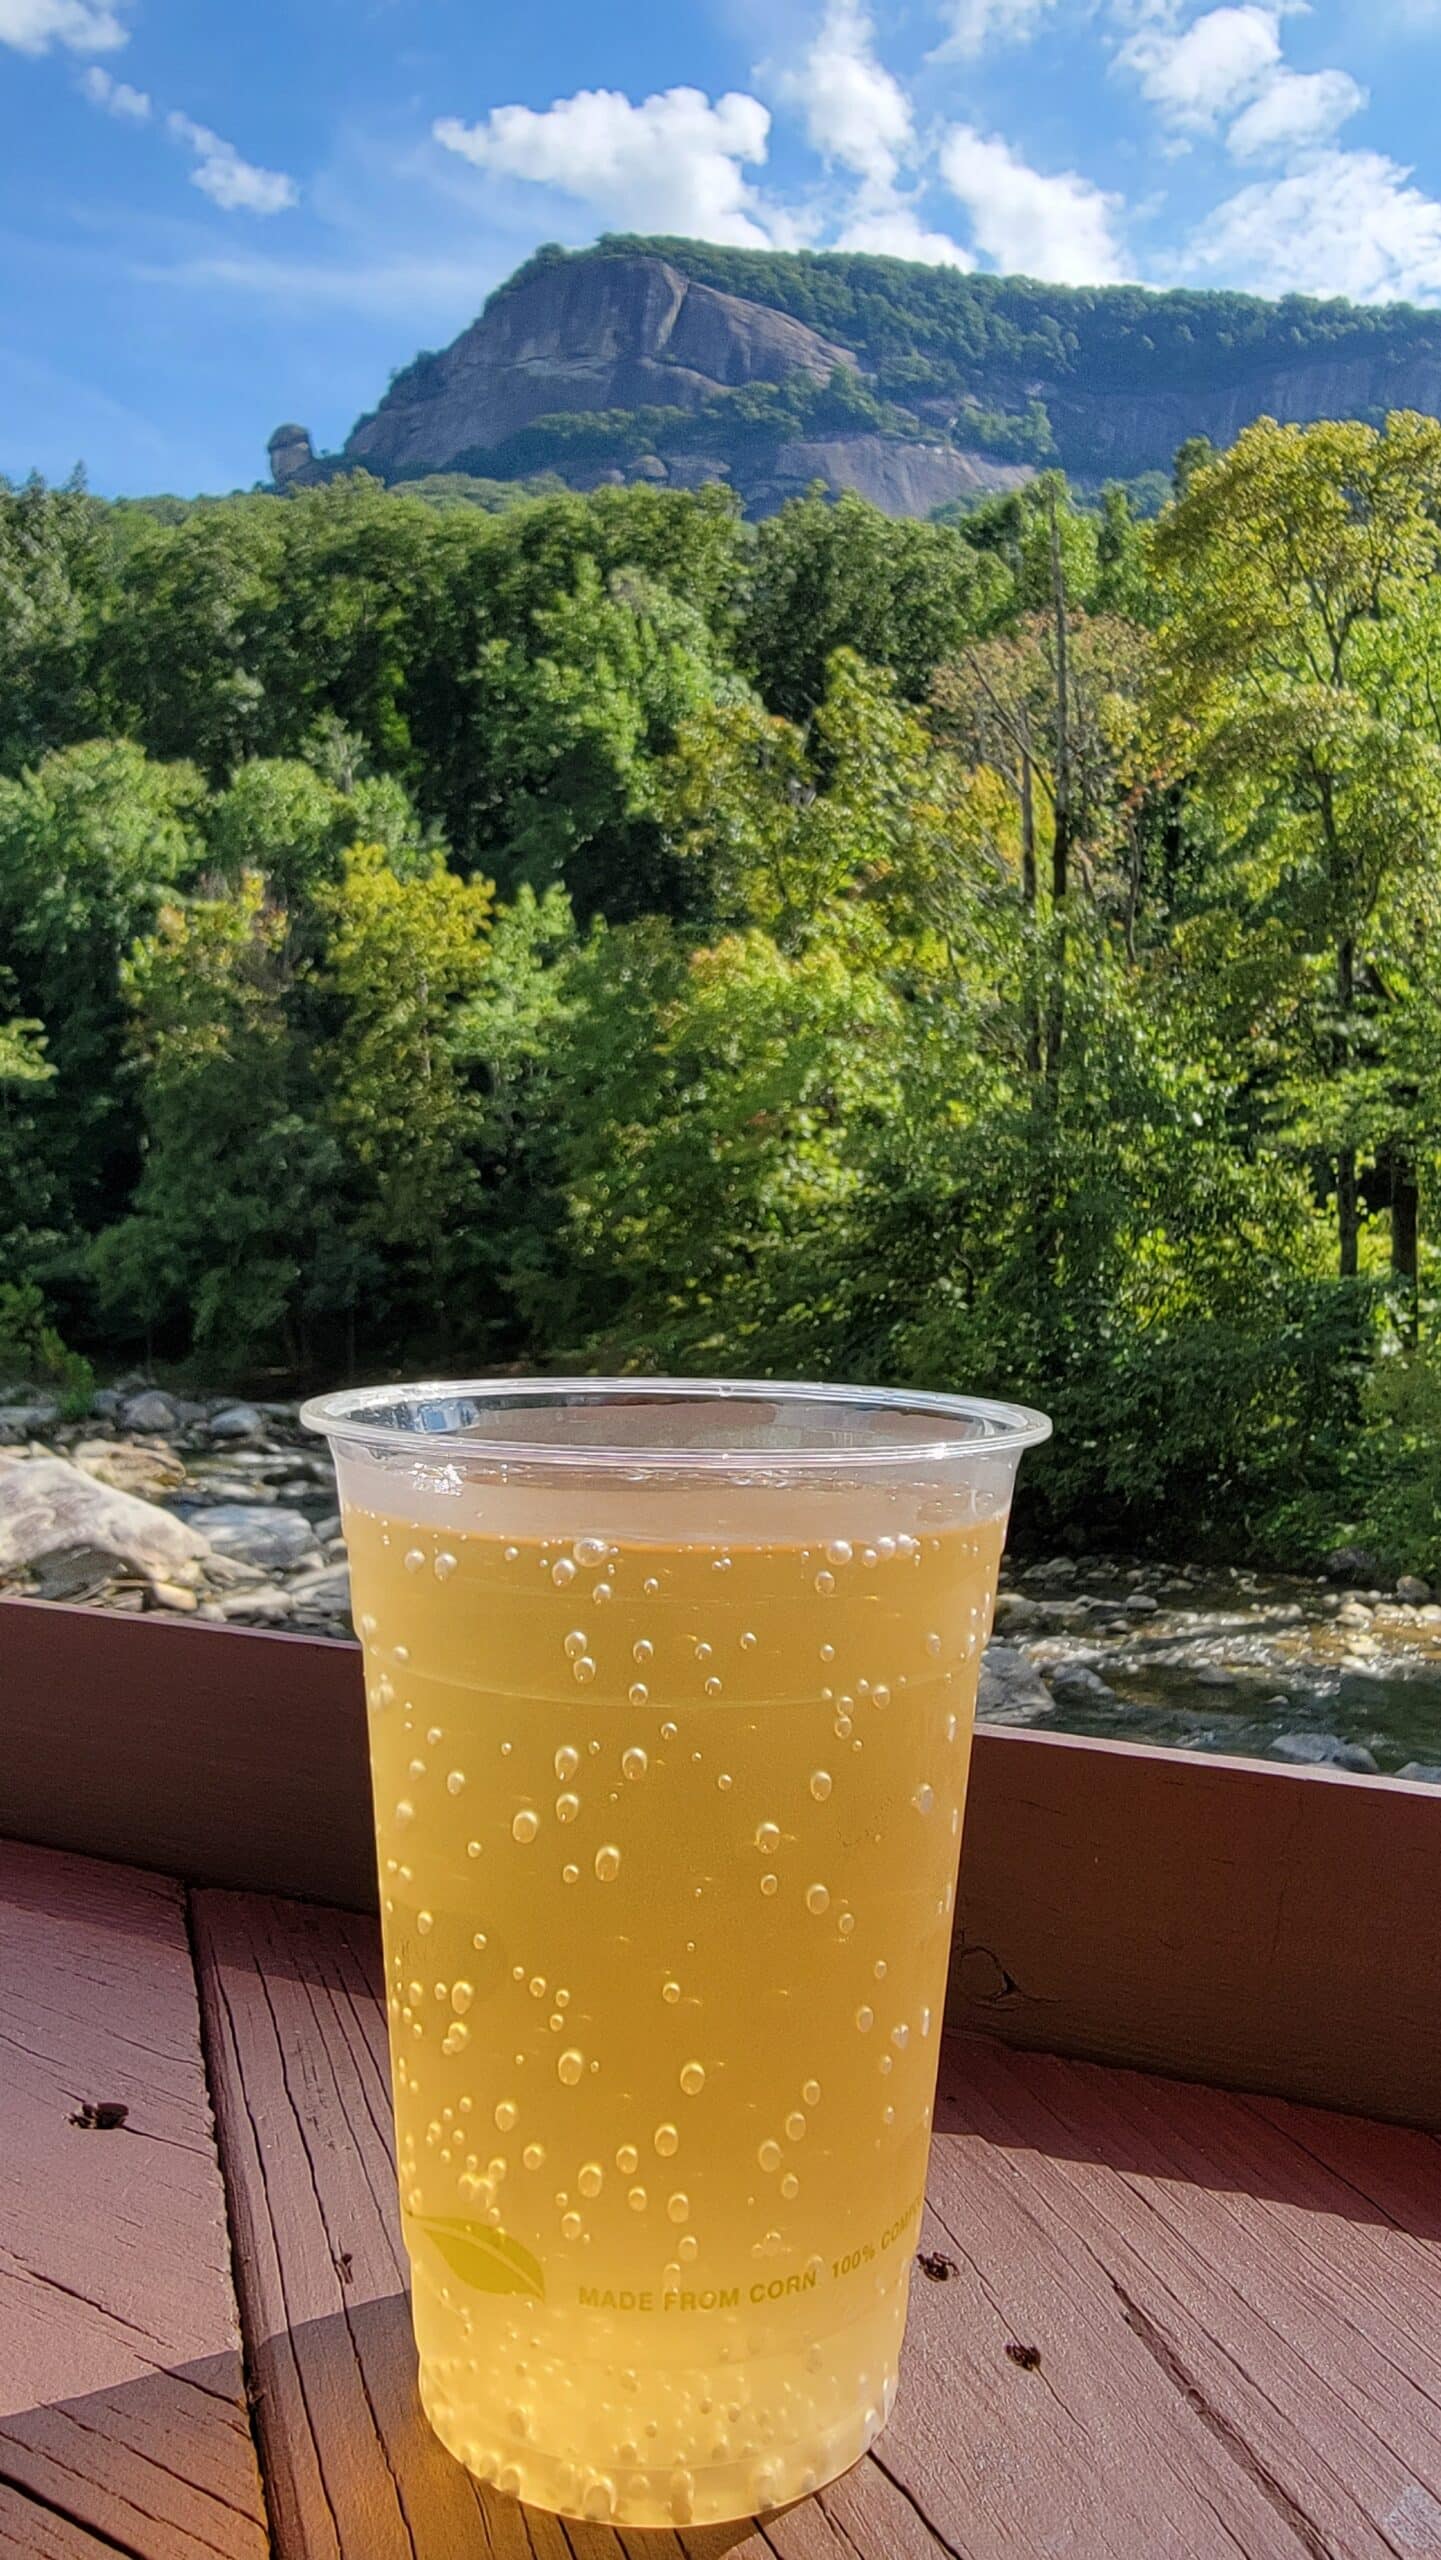 Hickory Nut Gorge Brewery beer with a view